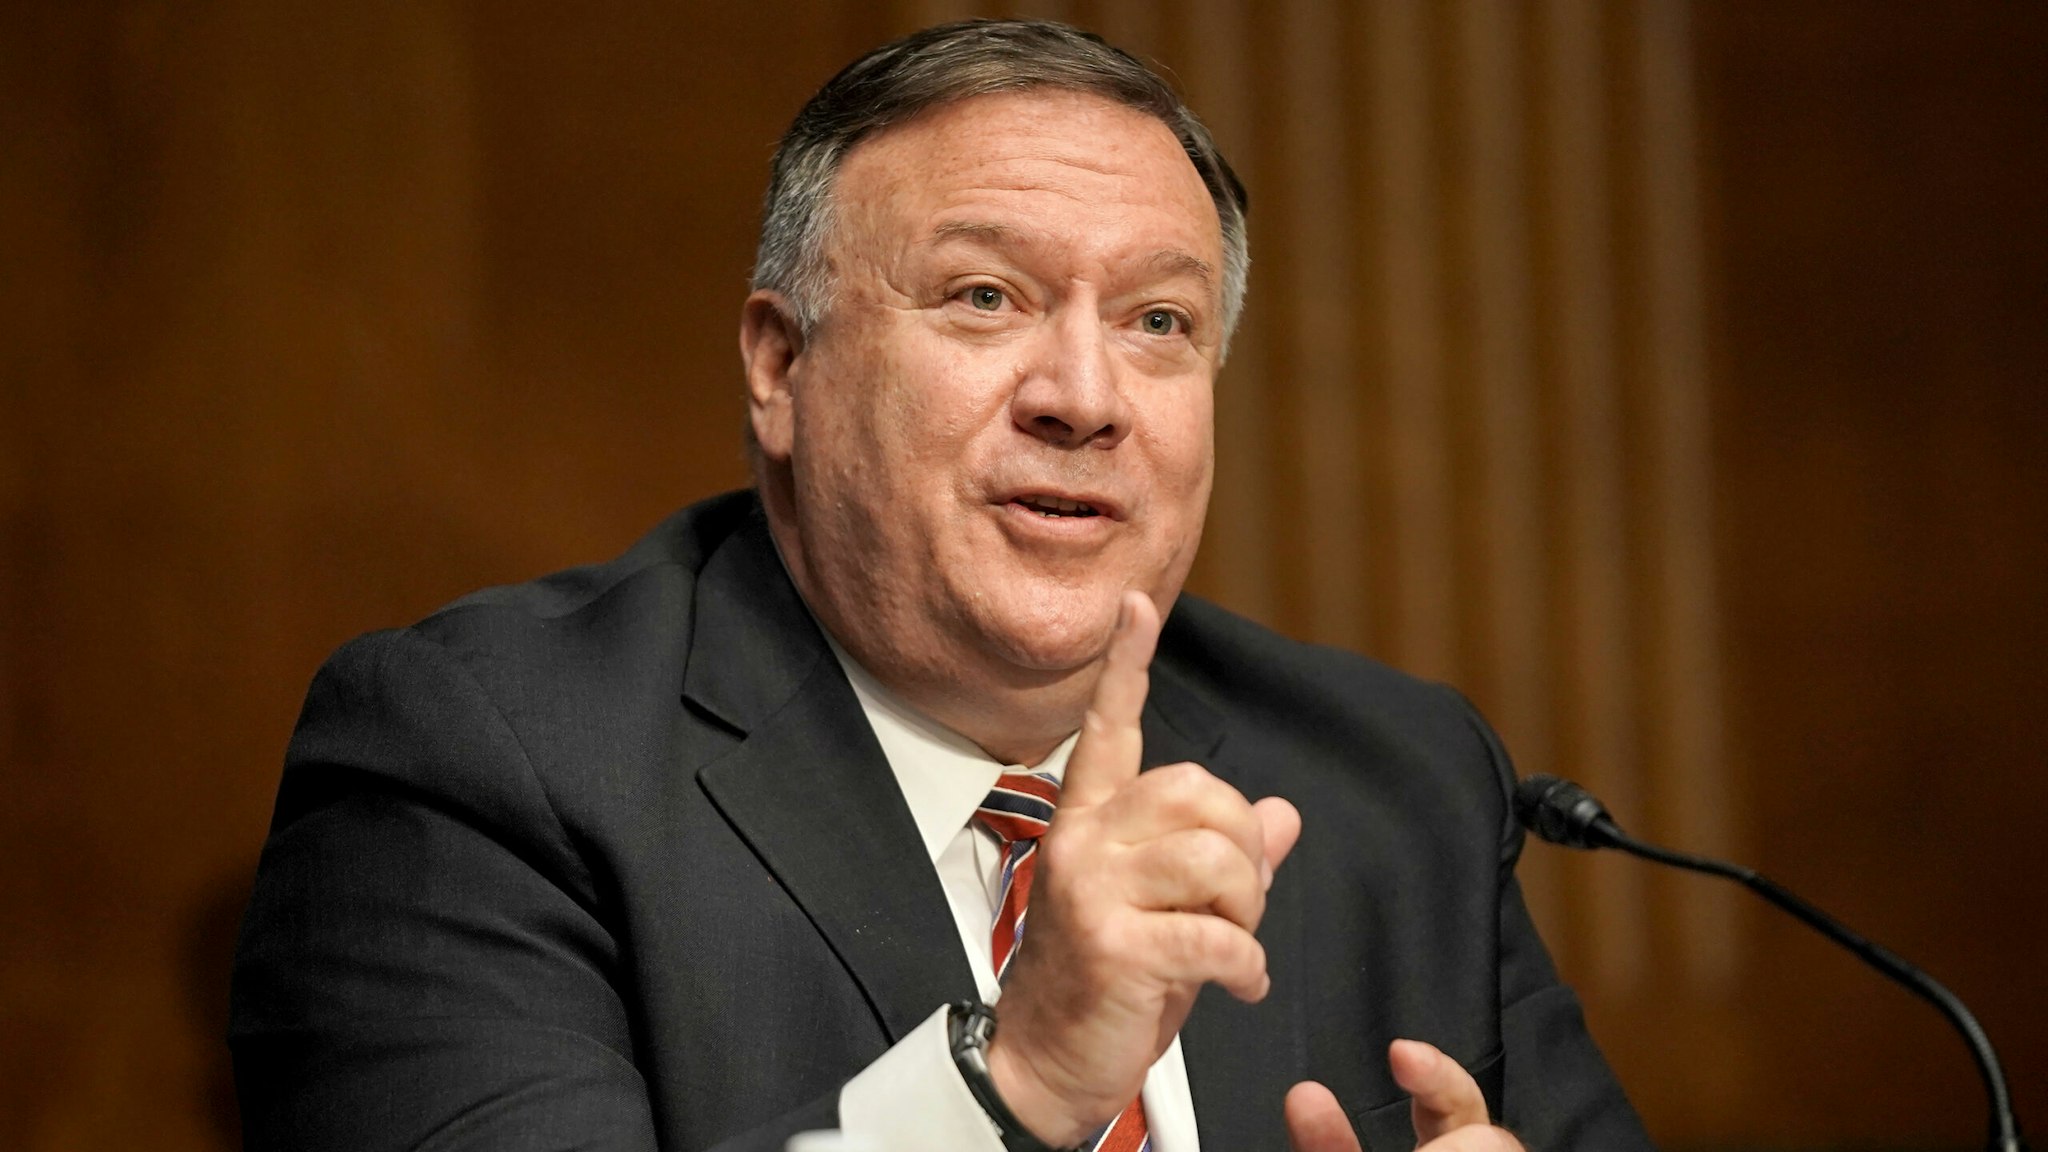 Mike Pompeo, U.S. secretary of state, speaks during a Senate Foreign Relations Committee hearing in Washington, D.C., U.S., on Thursday, July 30, 2020. Pompeo is testifying on the State Department's fiscal 2021 budget request.